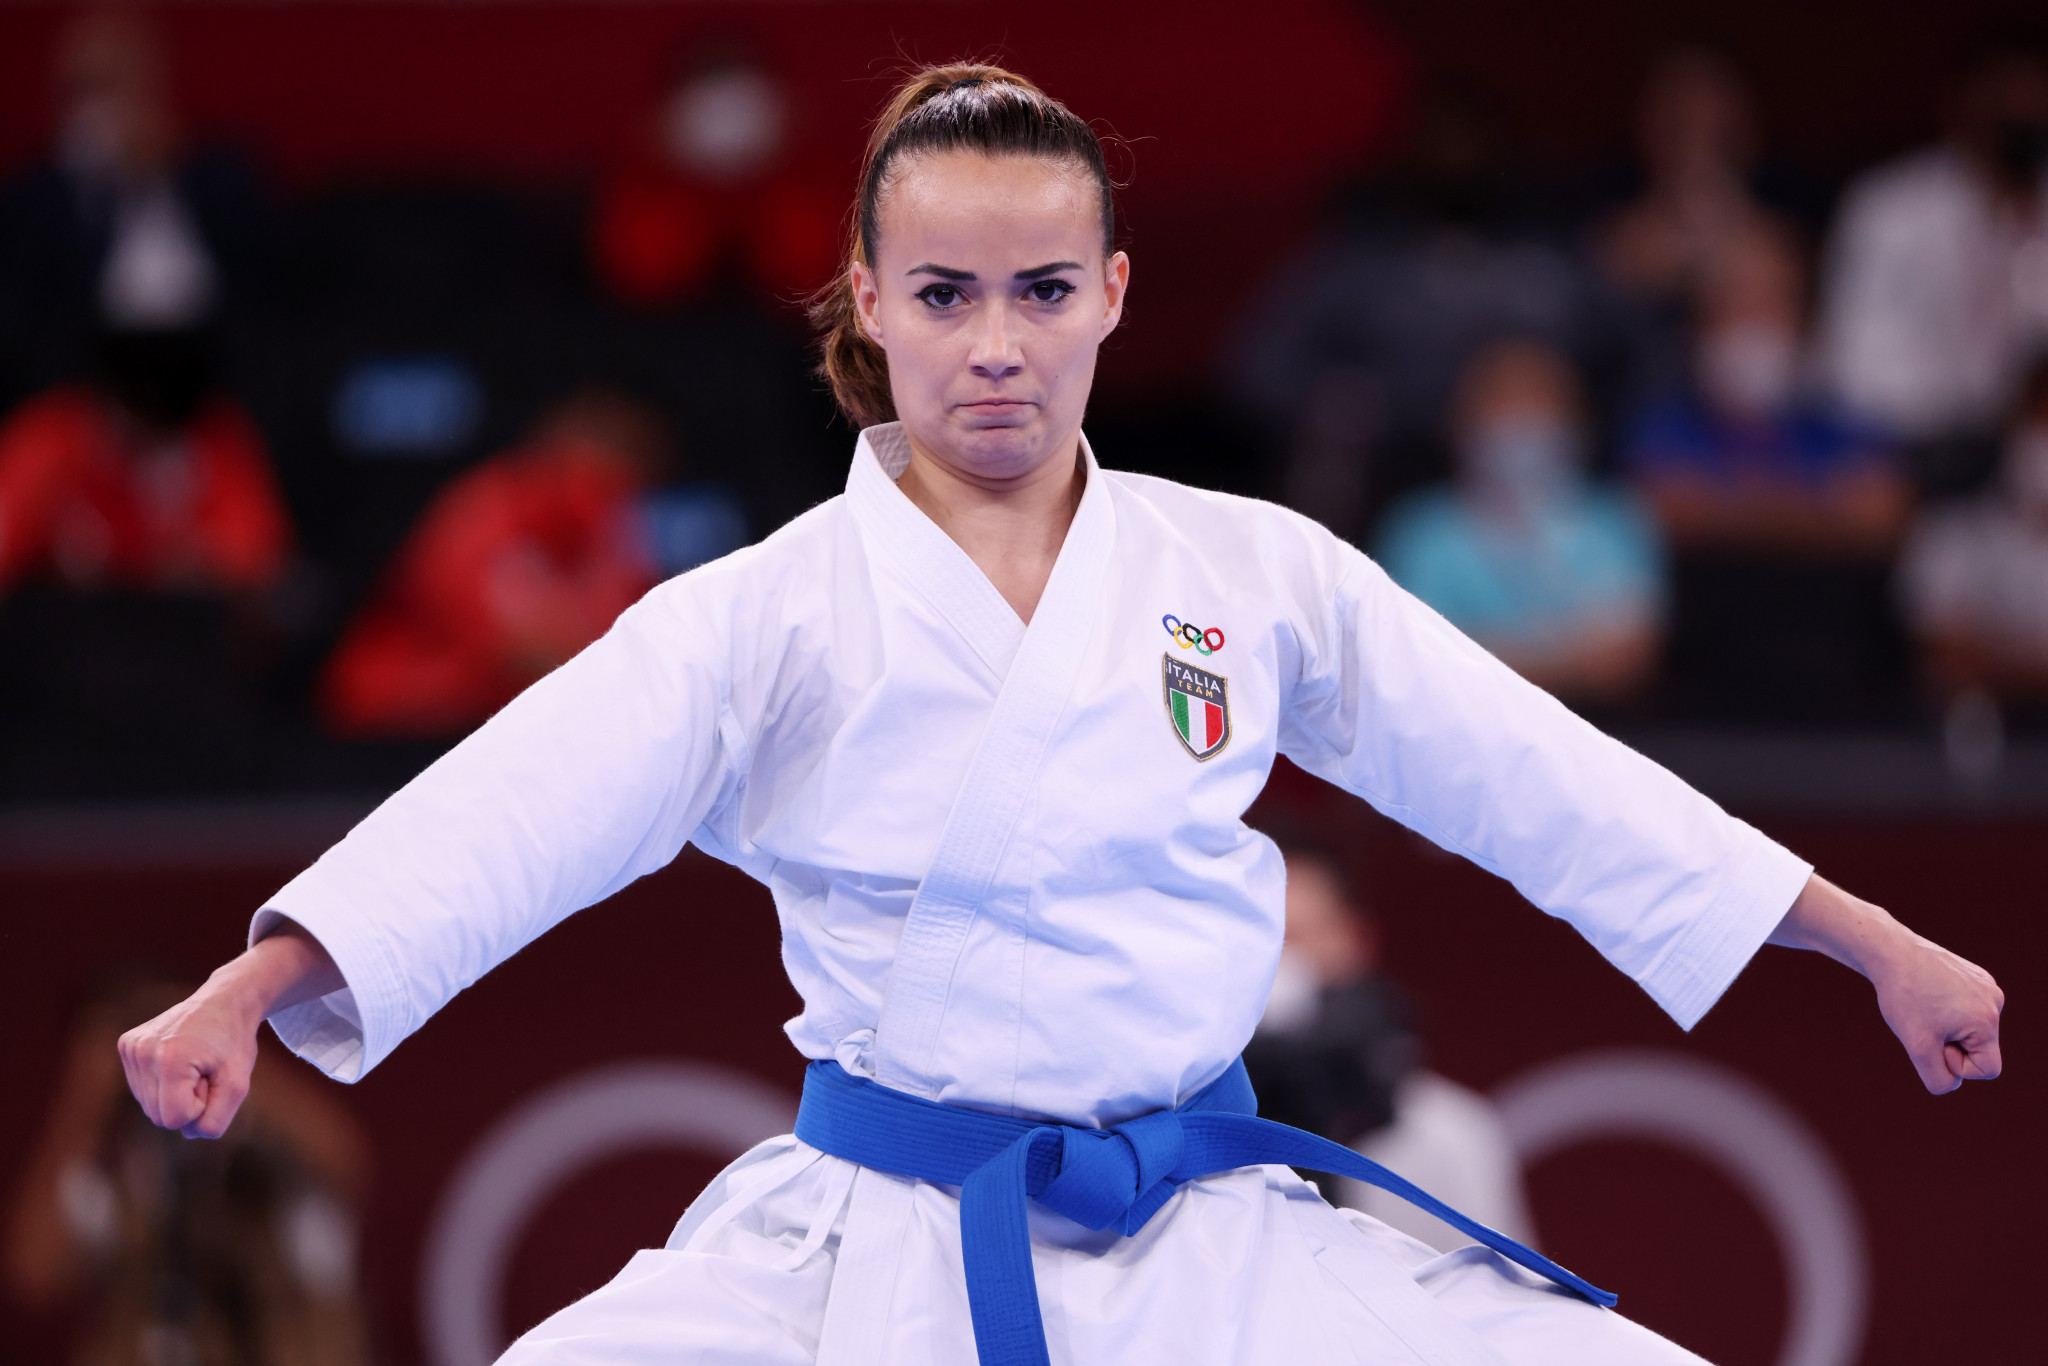 Viviana Bottaro is among a number of karate stars set to pass on advice to youngsters at the WKF Youth Camp ©Getty Images